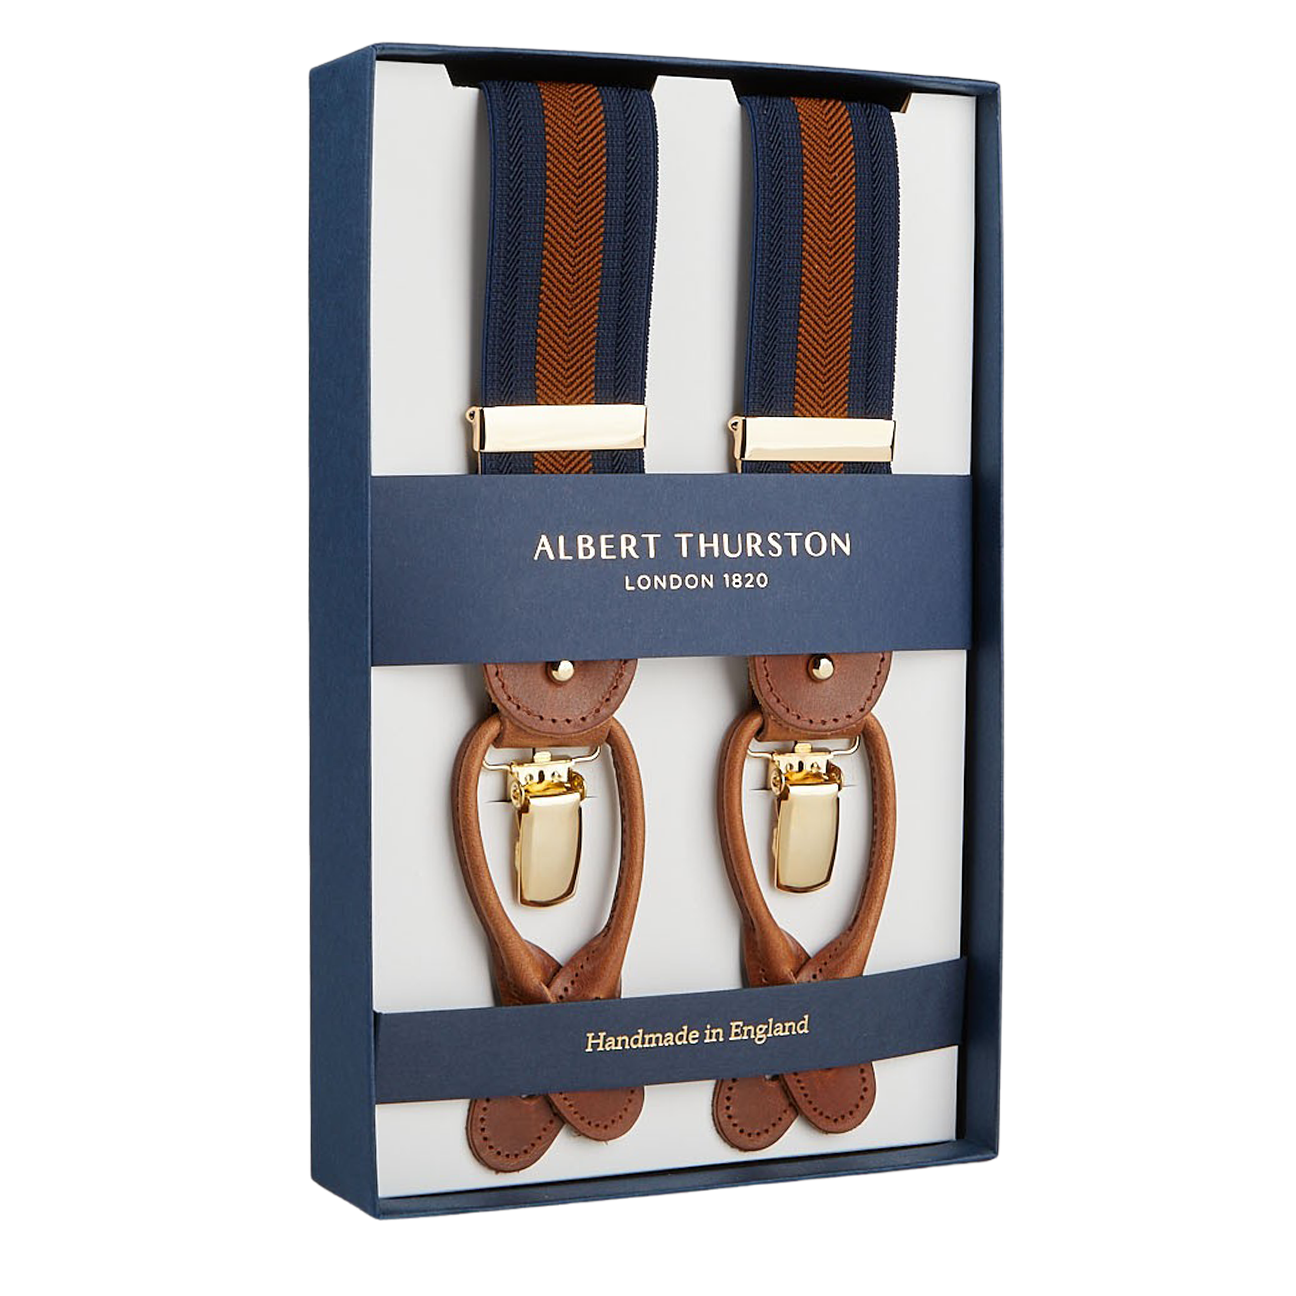 A boxed set of Albert Thurston Navy Brown Striped Nylon Leather 35 mm Braces with brown leather detailing and blue and brown fabric straps. The packaging, indicative of this esteemed British brand, proudly notes these suspenders are handmade in England.